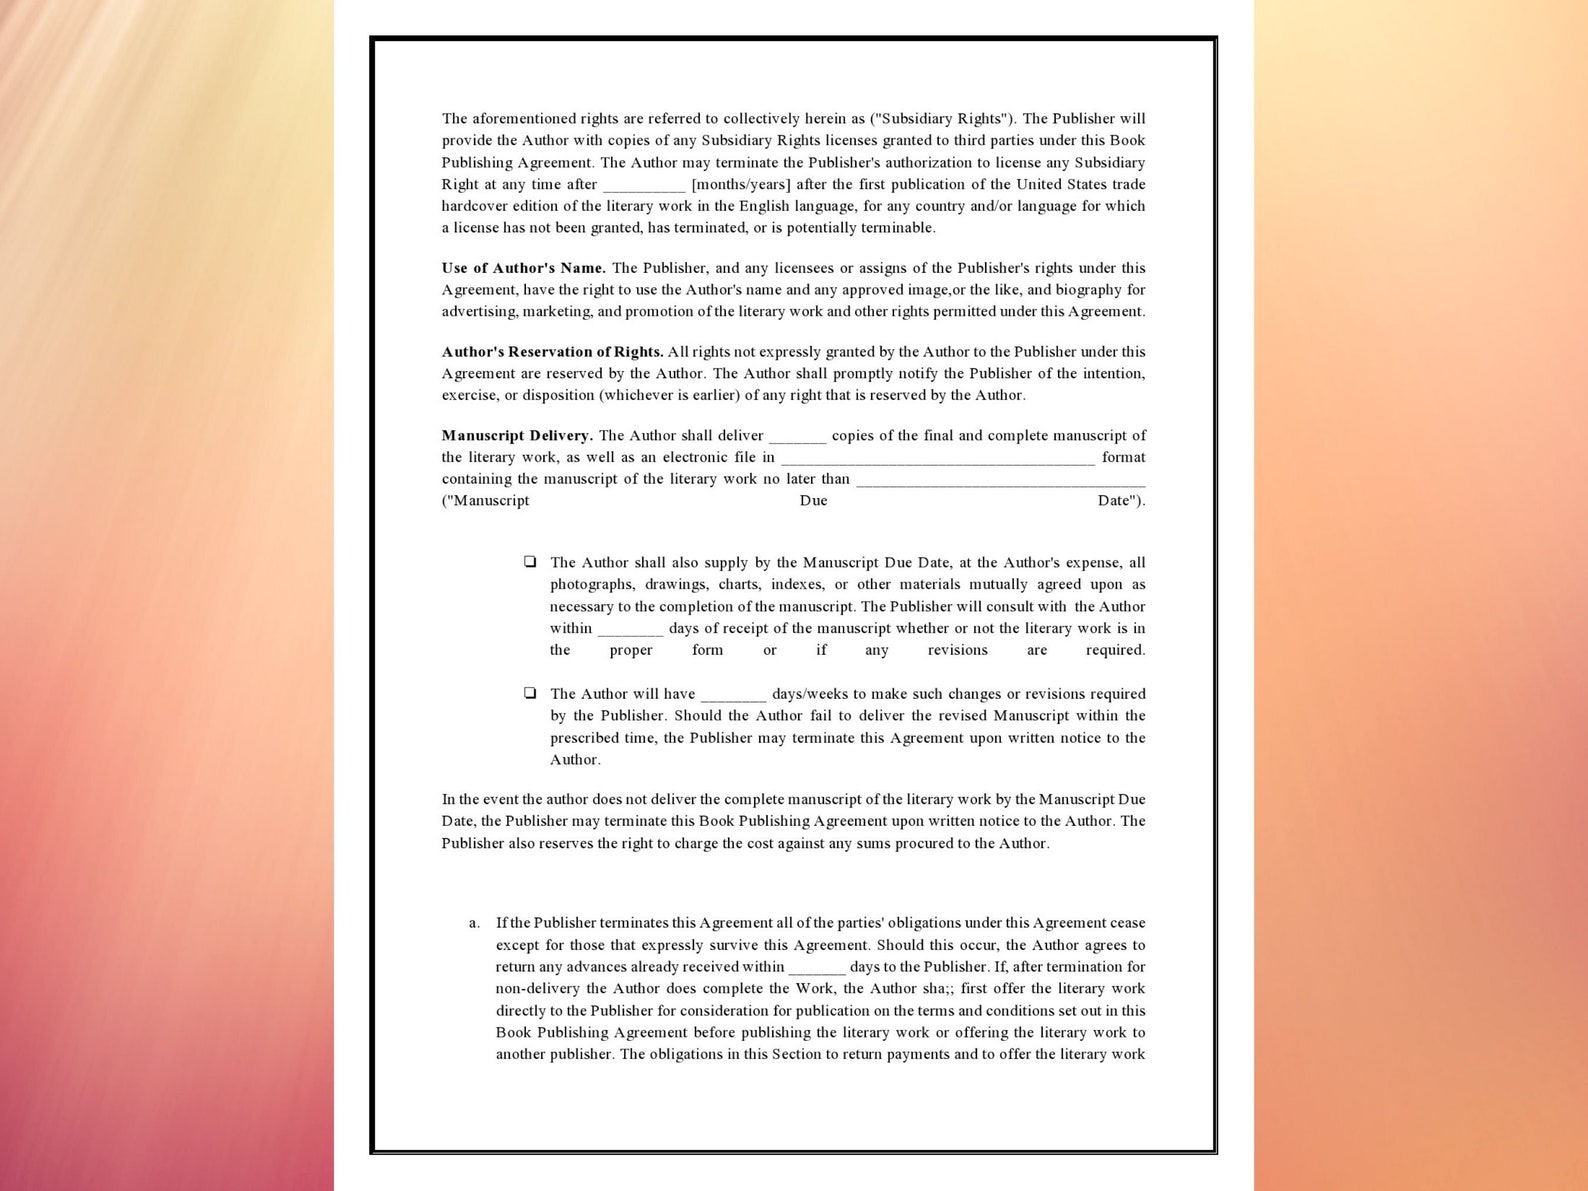 Book Publishing Contract Template Editable Instant Download Etsy